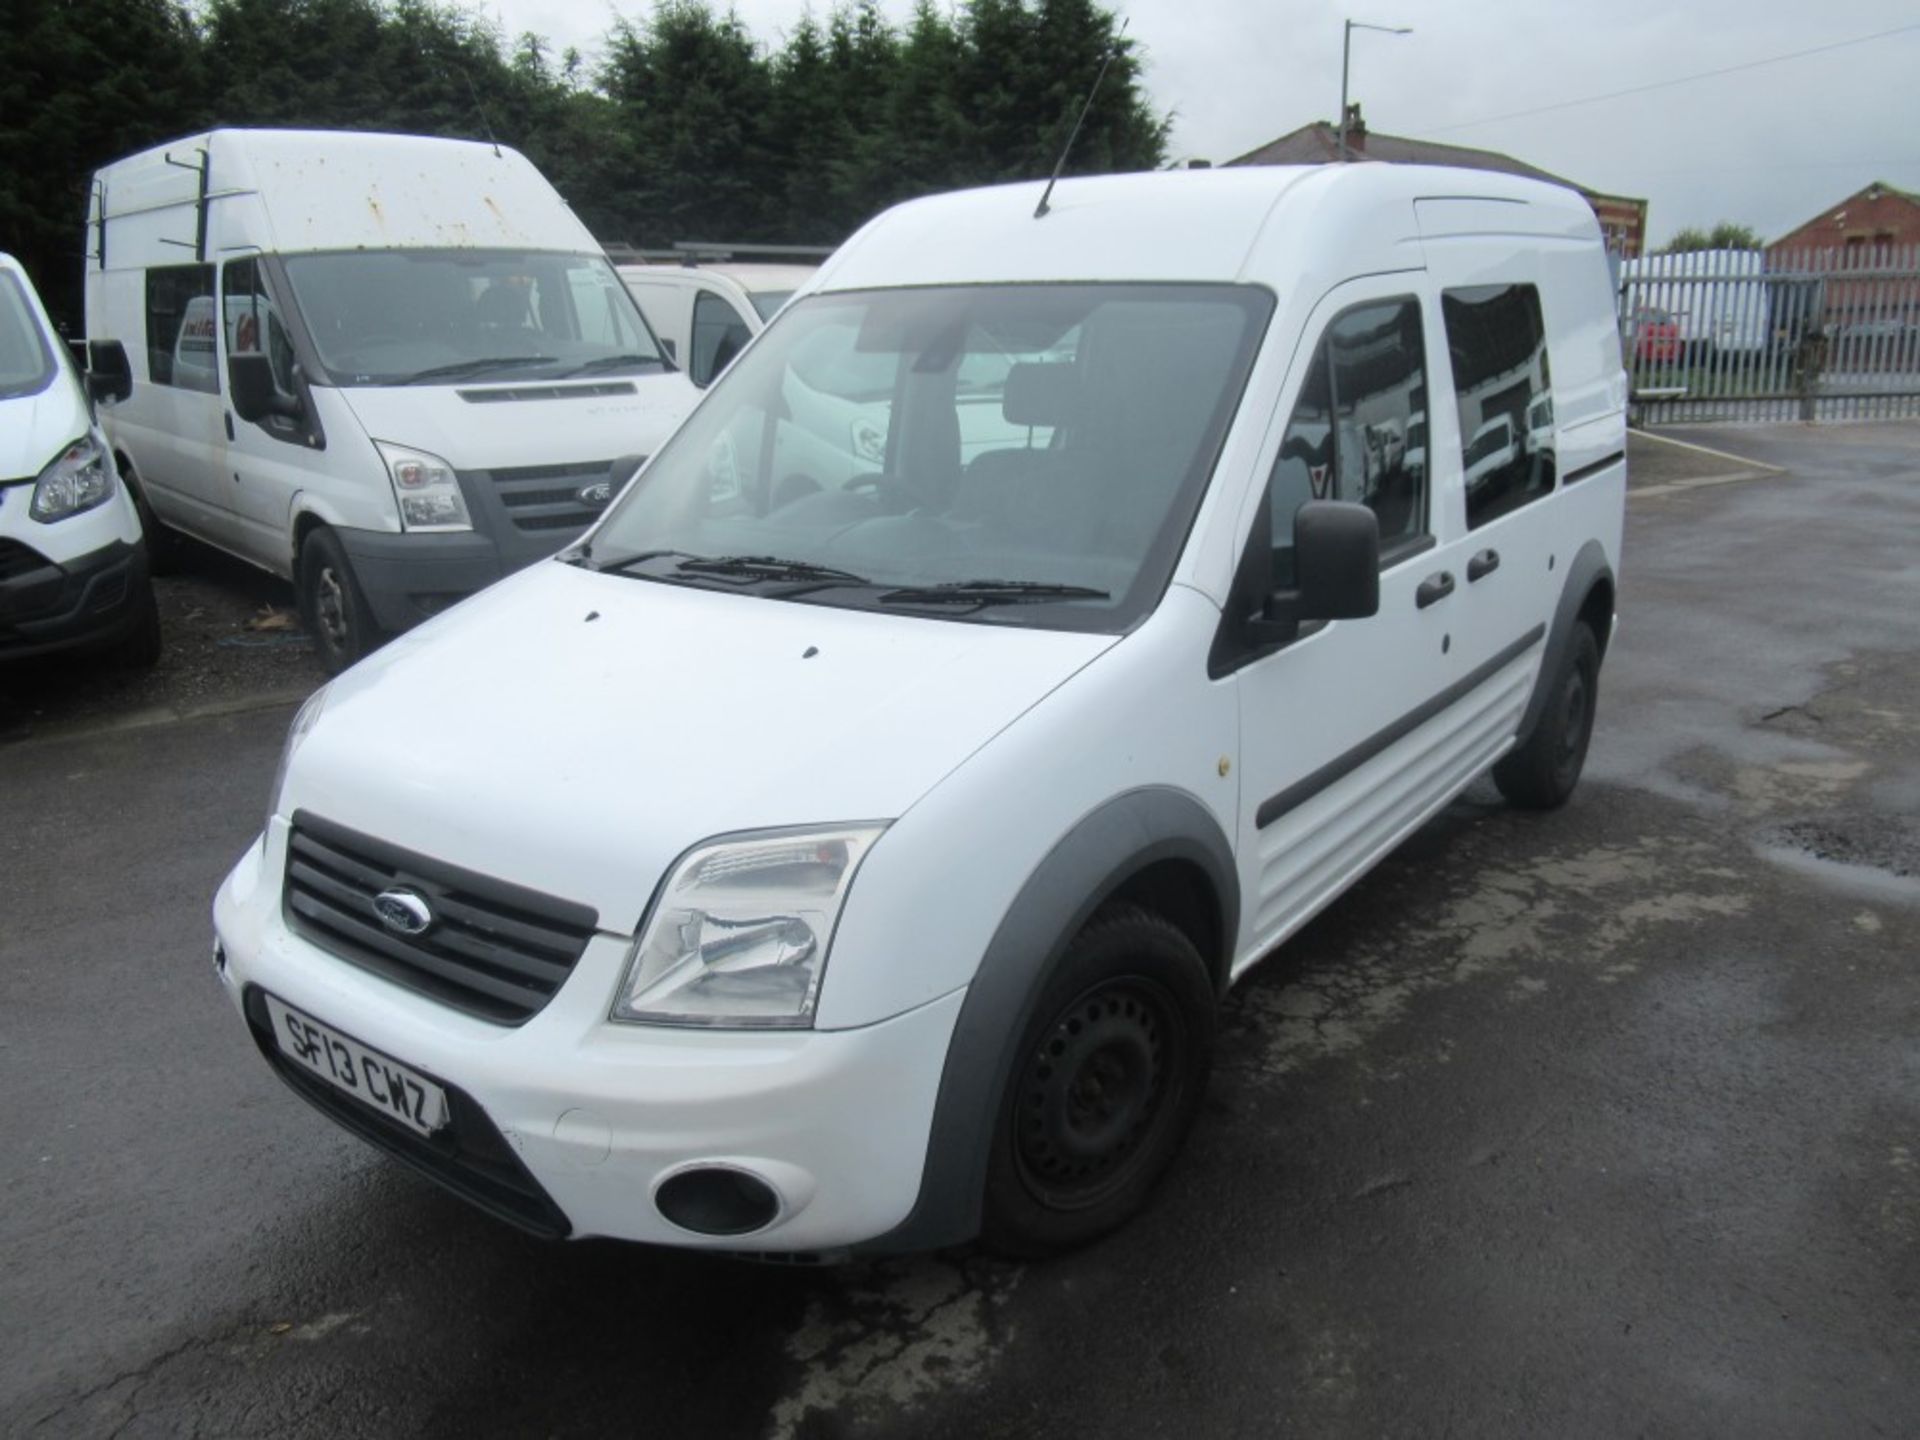 13 reg FORD TRANSIT CONNECT 90 T230 TREND, 1ST REG 03/13, 153853M WARRANTED, V5 HERE, 1 OWNER FROM - Image 2 of 6